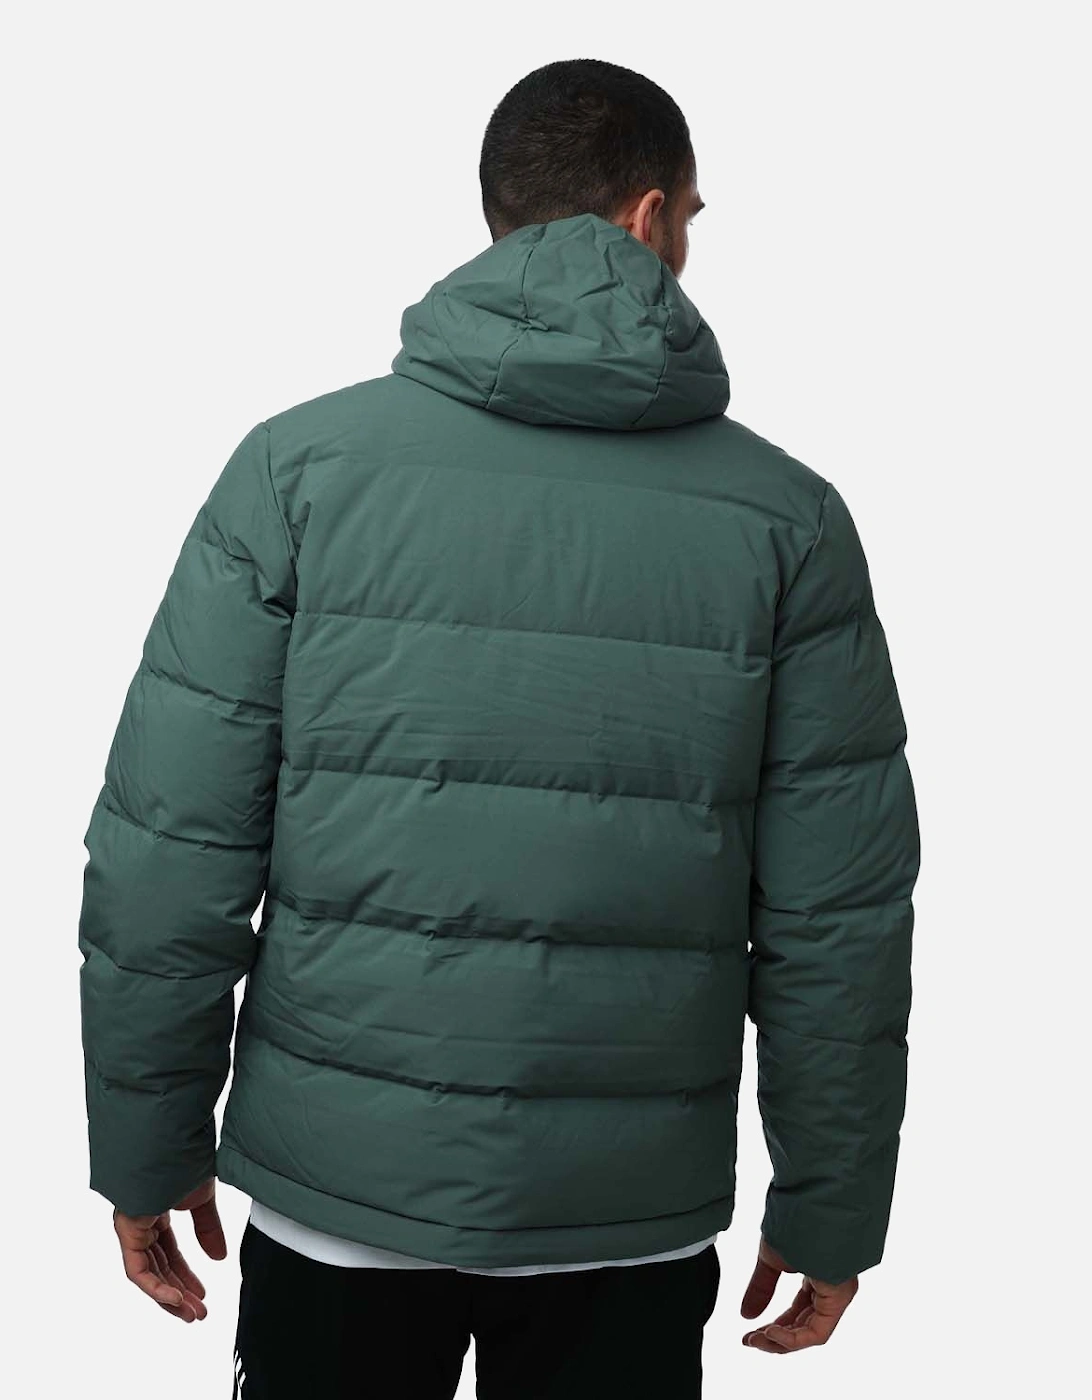 Mens Helionic Hooded Down Jacket